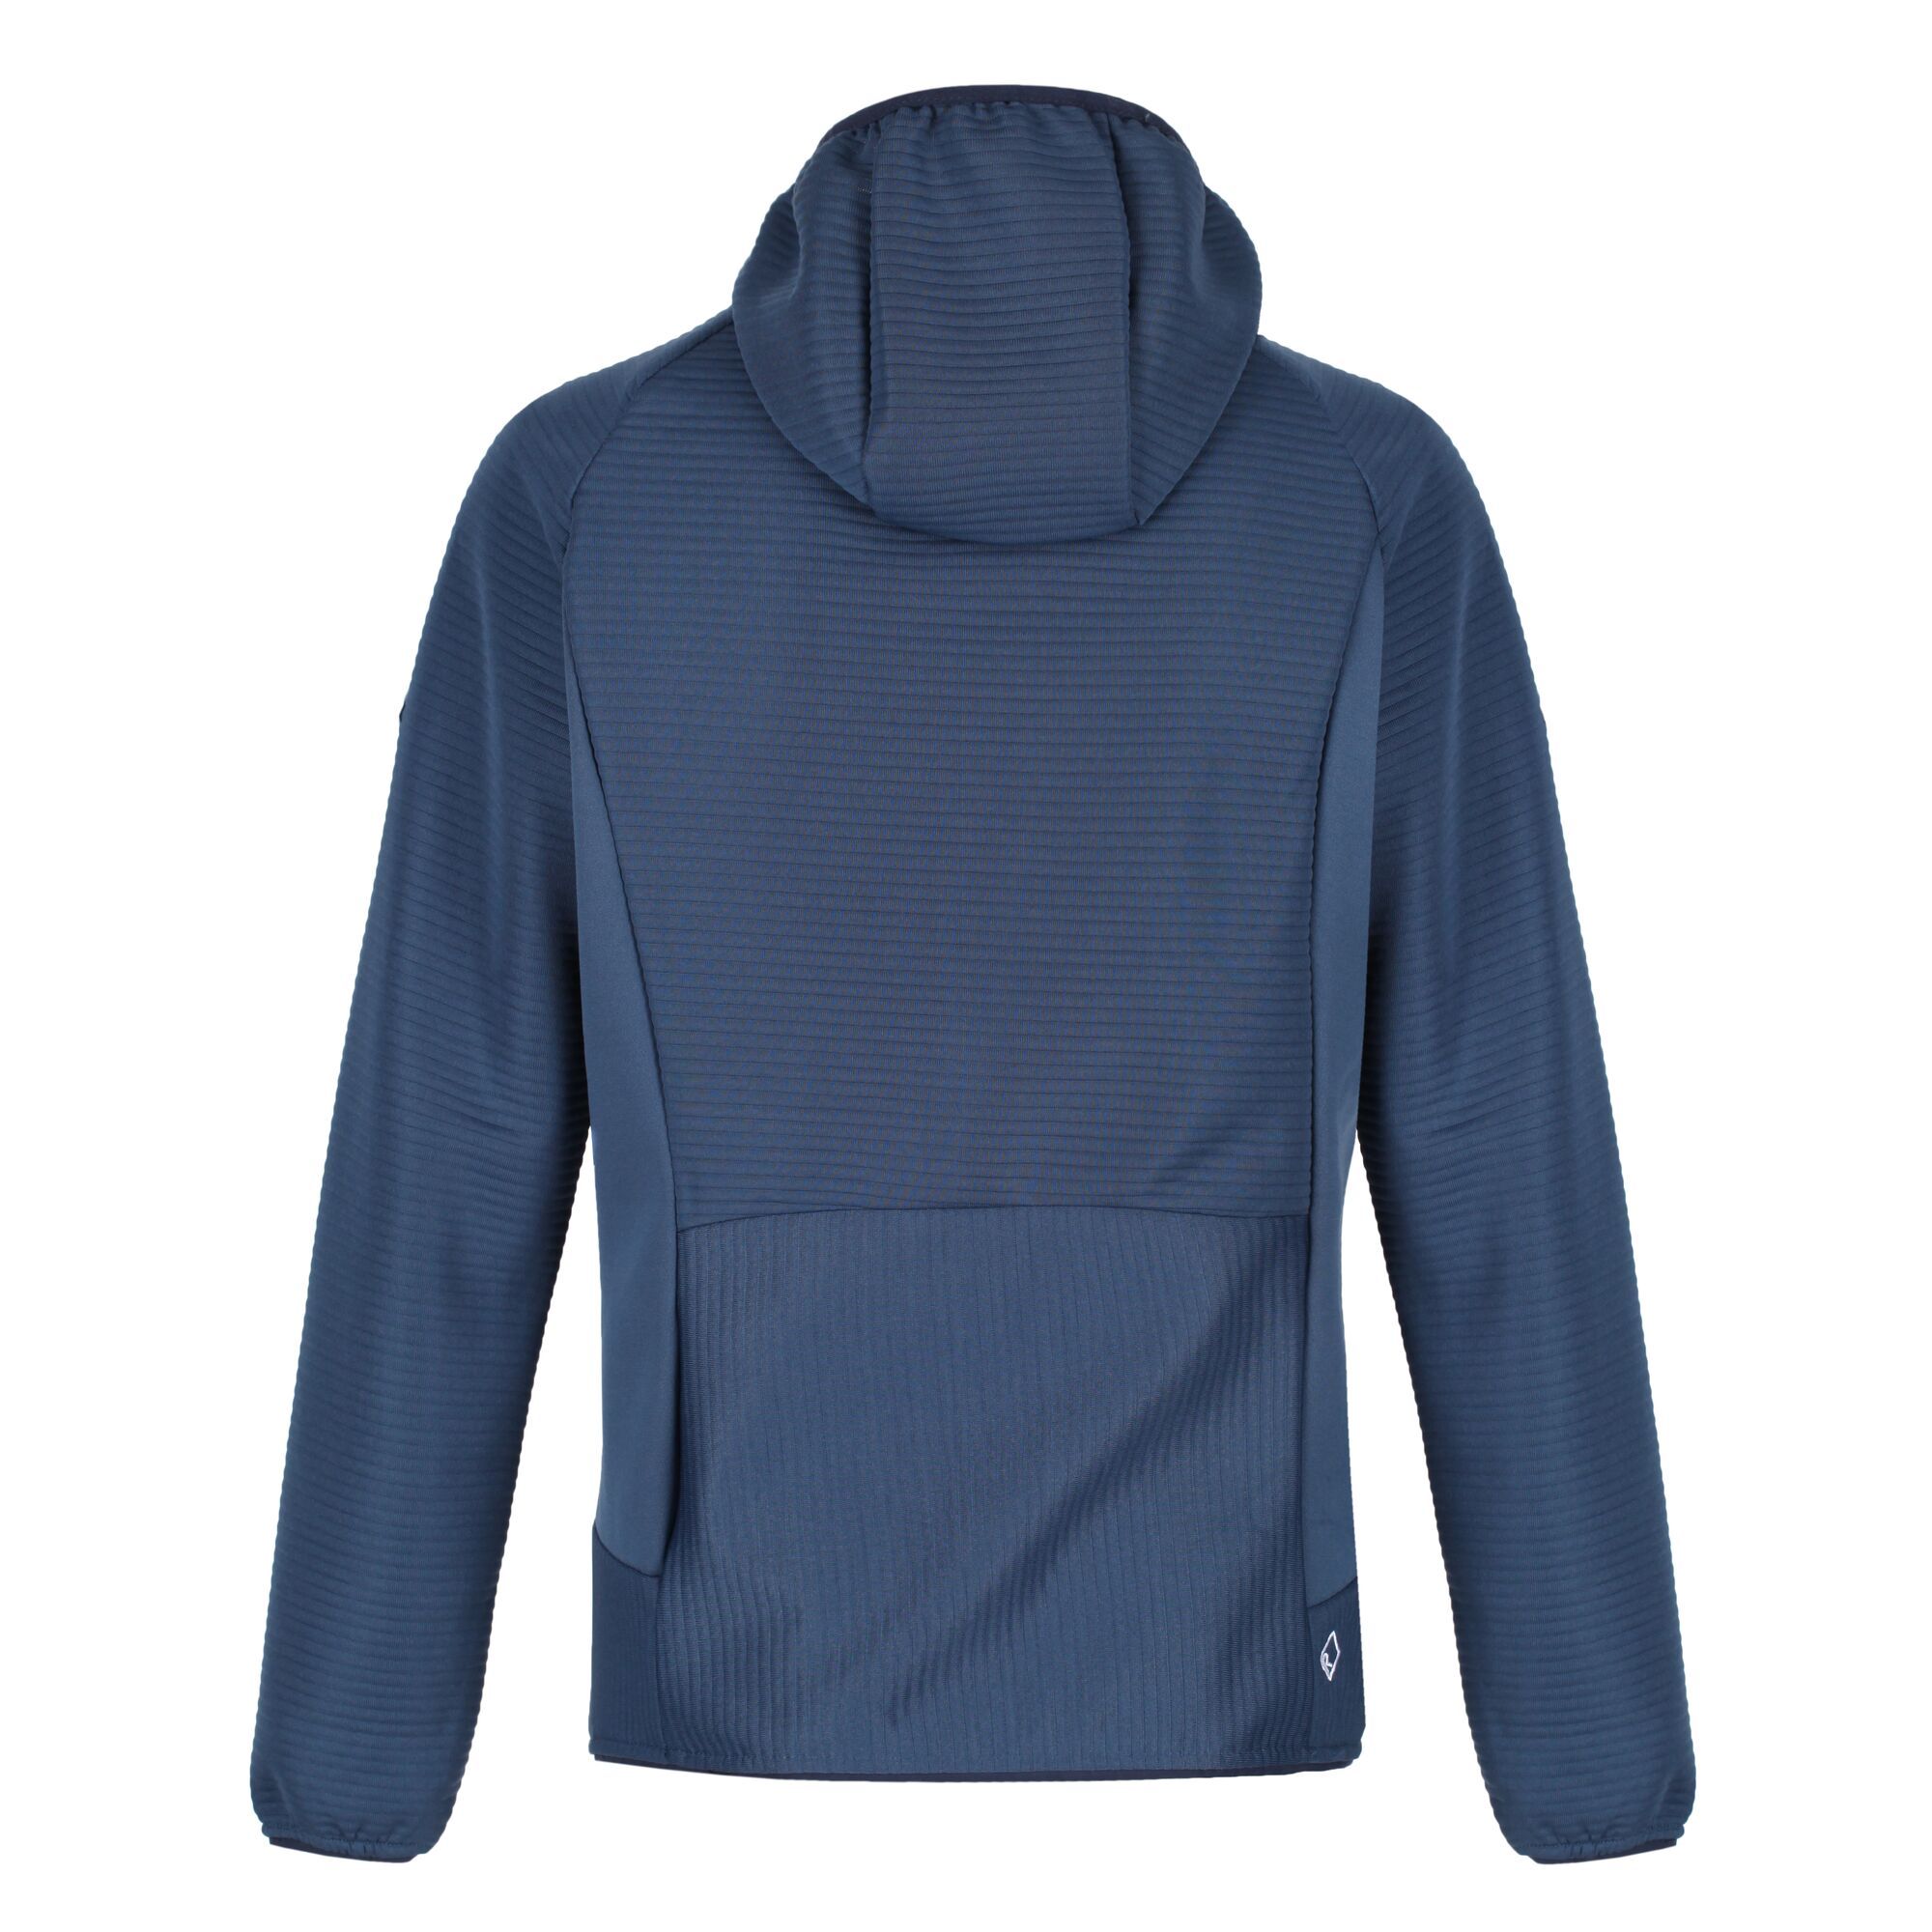 100% polyester. Ribbed fleece fabric. Stretch binding to hood and cuffs. With two zipped pockets. Extol stretch side panels. Adjustable shock cord hem. Size/Bust (ins) (8/32in), (10/34in), (12/36in), (14/38in), (16/40in), (18/42in), (20/44in).